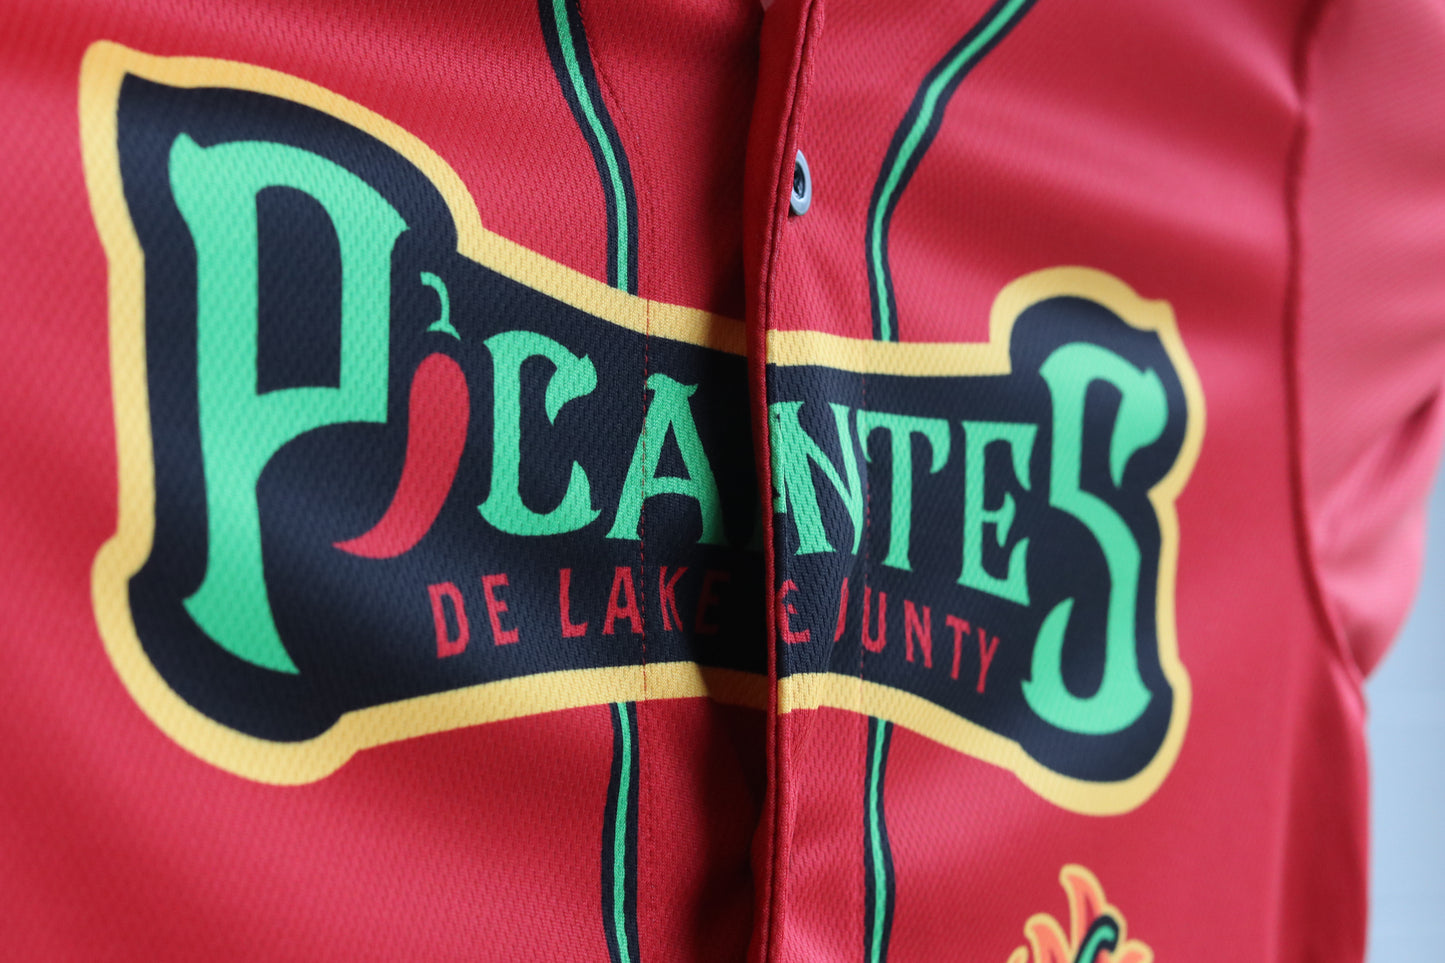 Official Player Worn Picantes de Lake County Jerseys